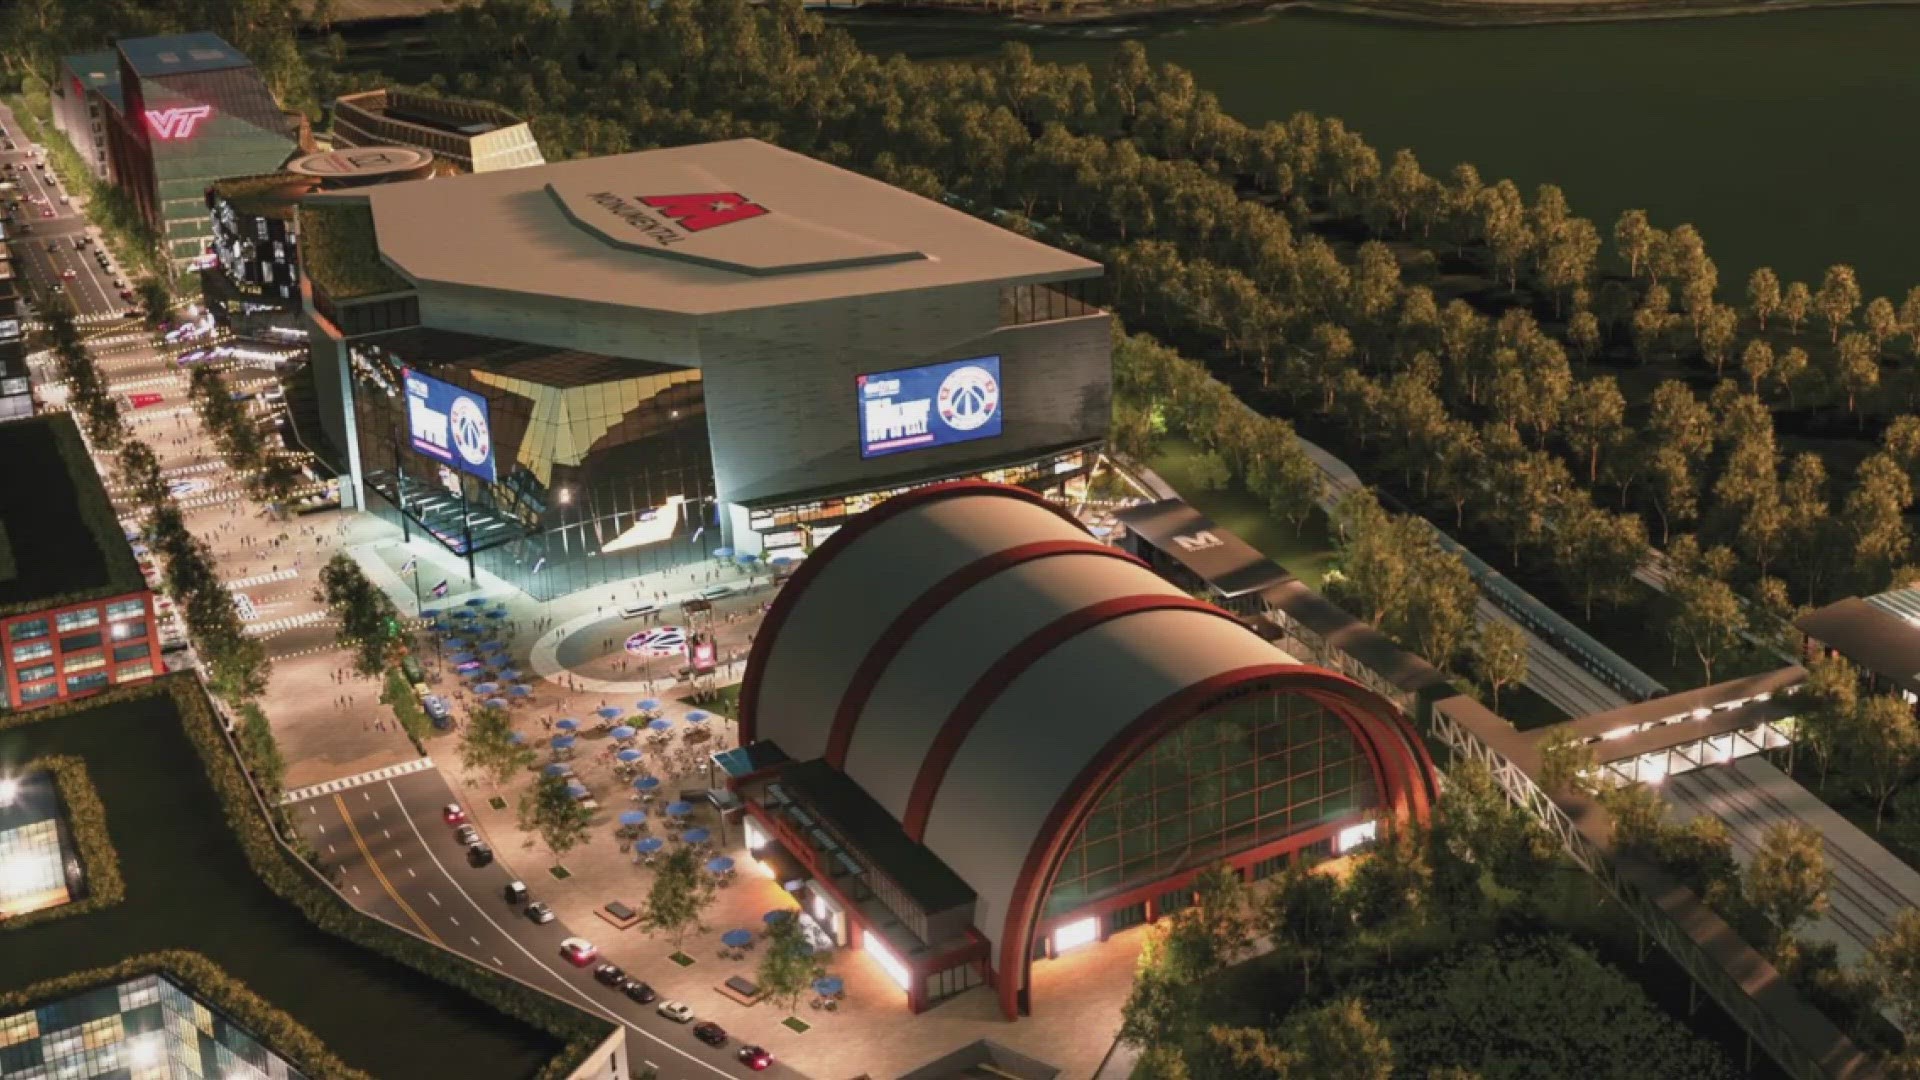 Lawmakers must first pass a bill for Monumental Sports to move the Washington Capitals and Wizards to a new $1.8 billion sports and entertainment complex.